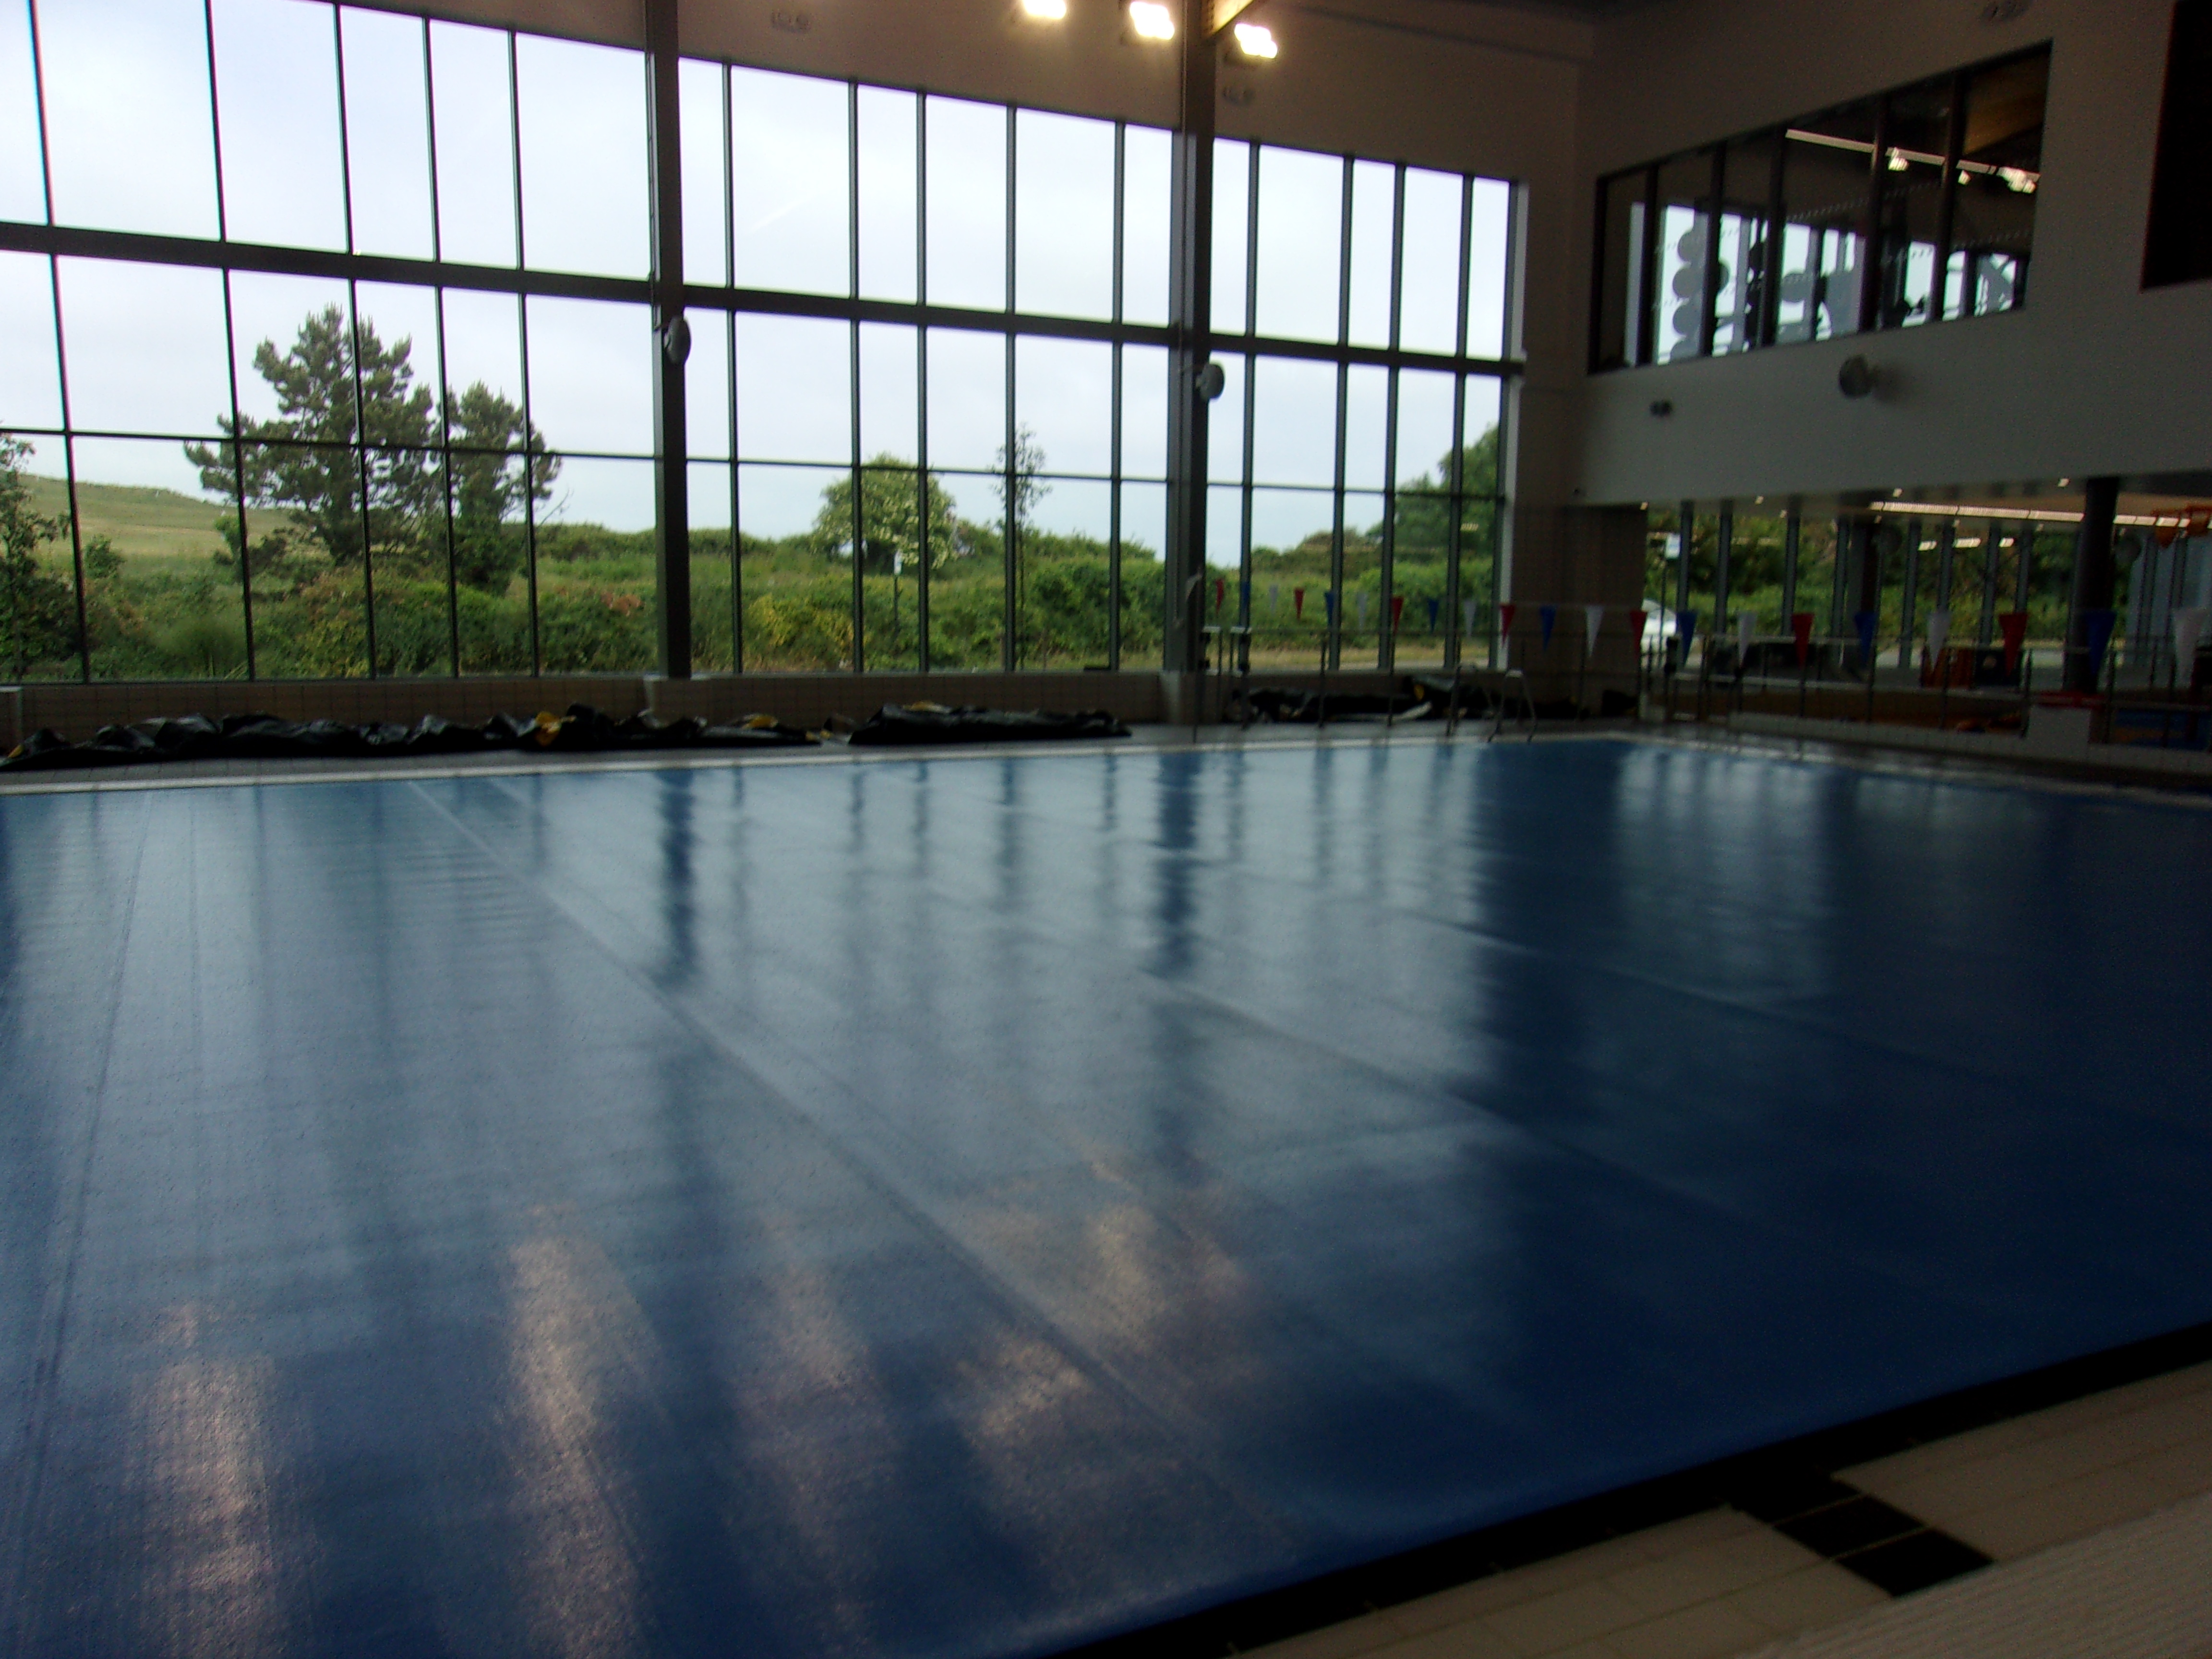 Image of the pool cover over the Reef Leisure Centre swimming pool at sunset. Large glass walls look out to greenery.